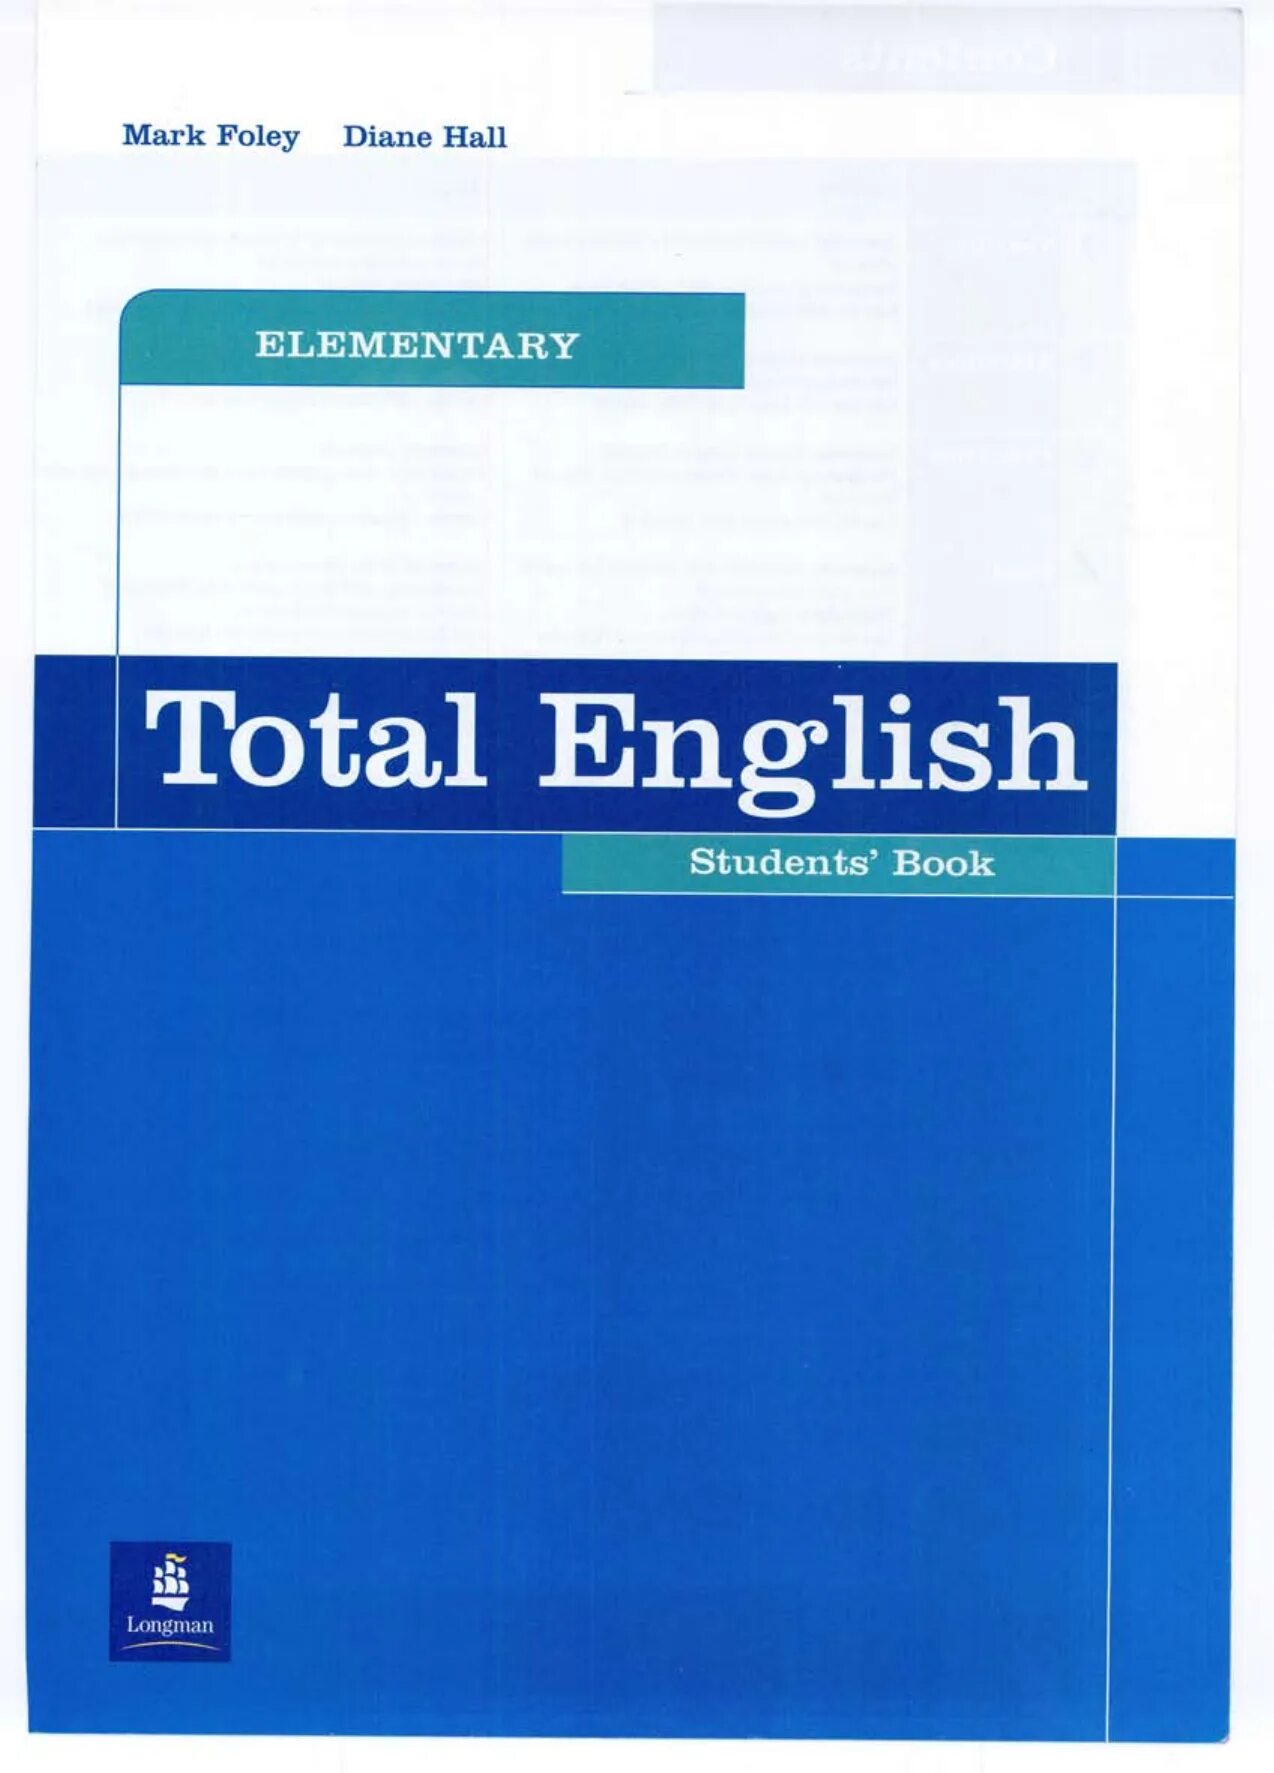 Total English Elementary. New total English Elementary. New total English, Longman. Total English Intermediate student's book. Student total english